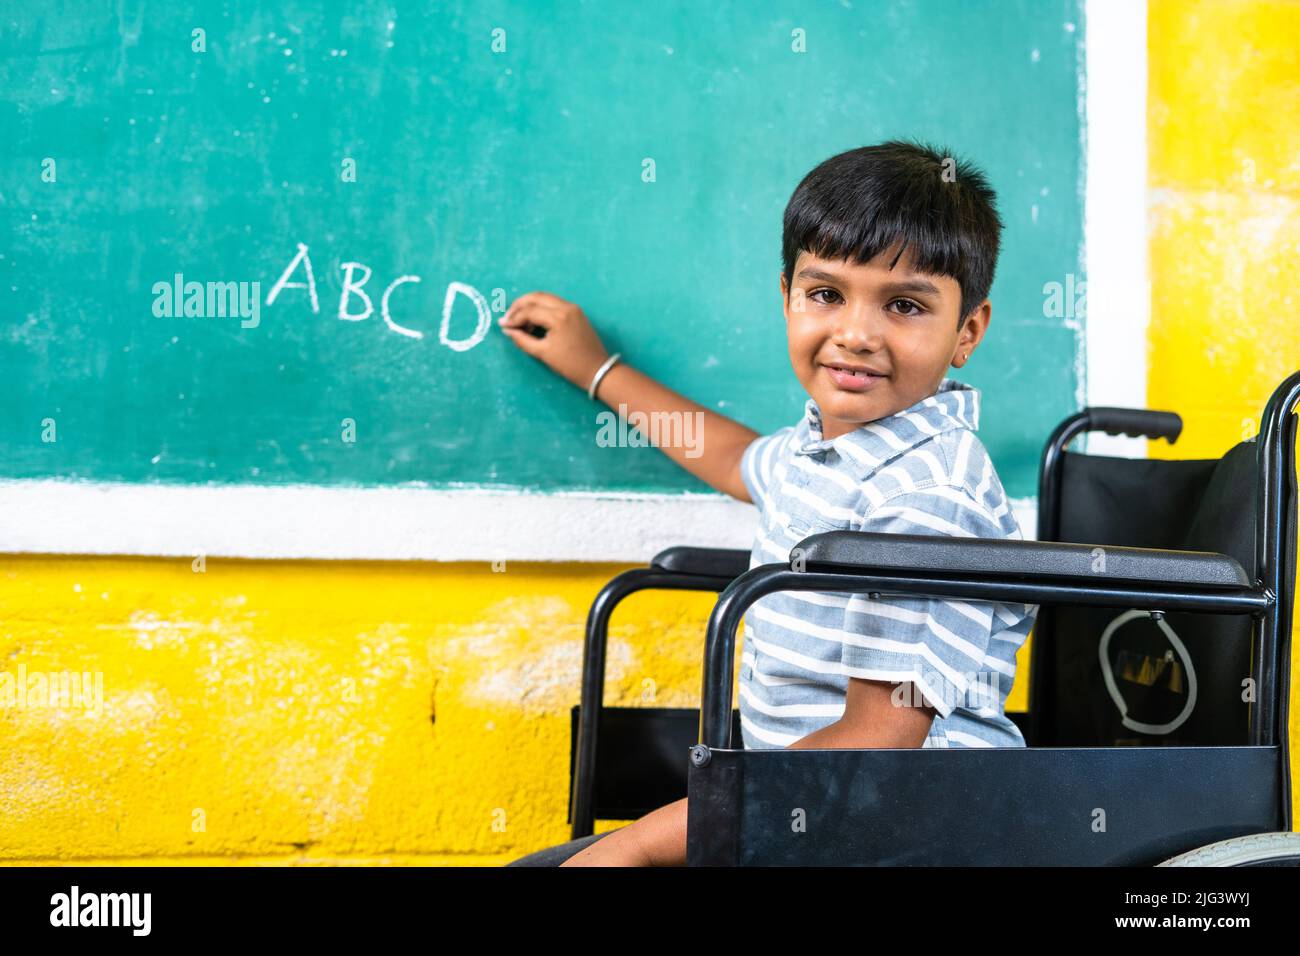 Young teenger school kid with disability on wheel chair writing on board while looking at camera - concept of education, growth and development Stock Photo